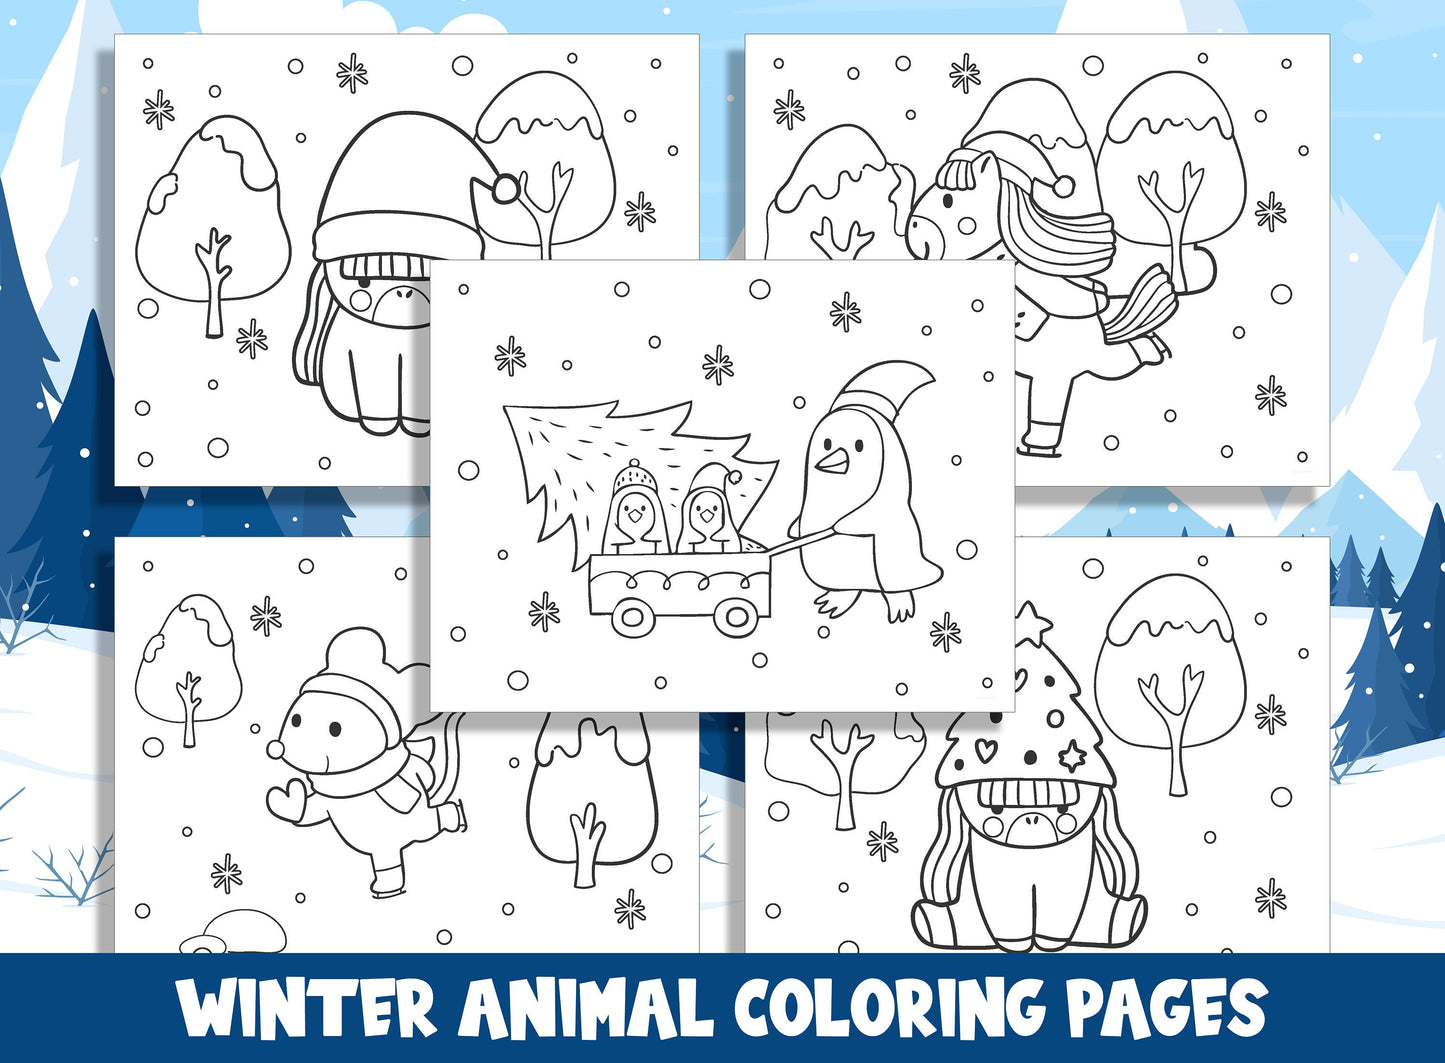 Arctic Adventures: 20 Playful Winter Animal Coloring Pages for Kids, PDF File, Instant Download